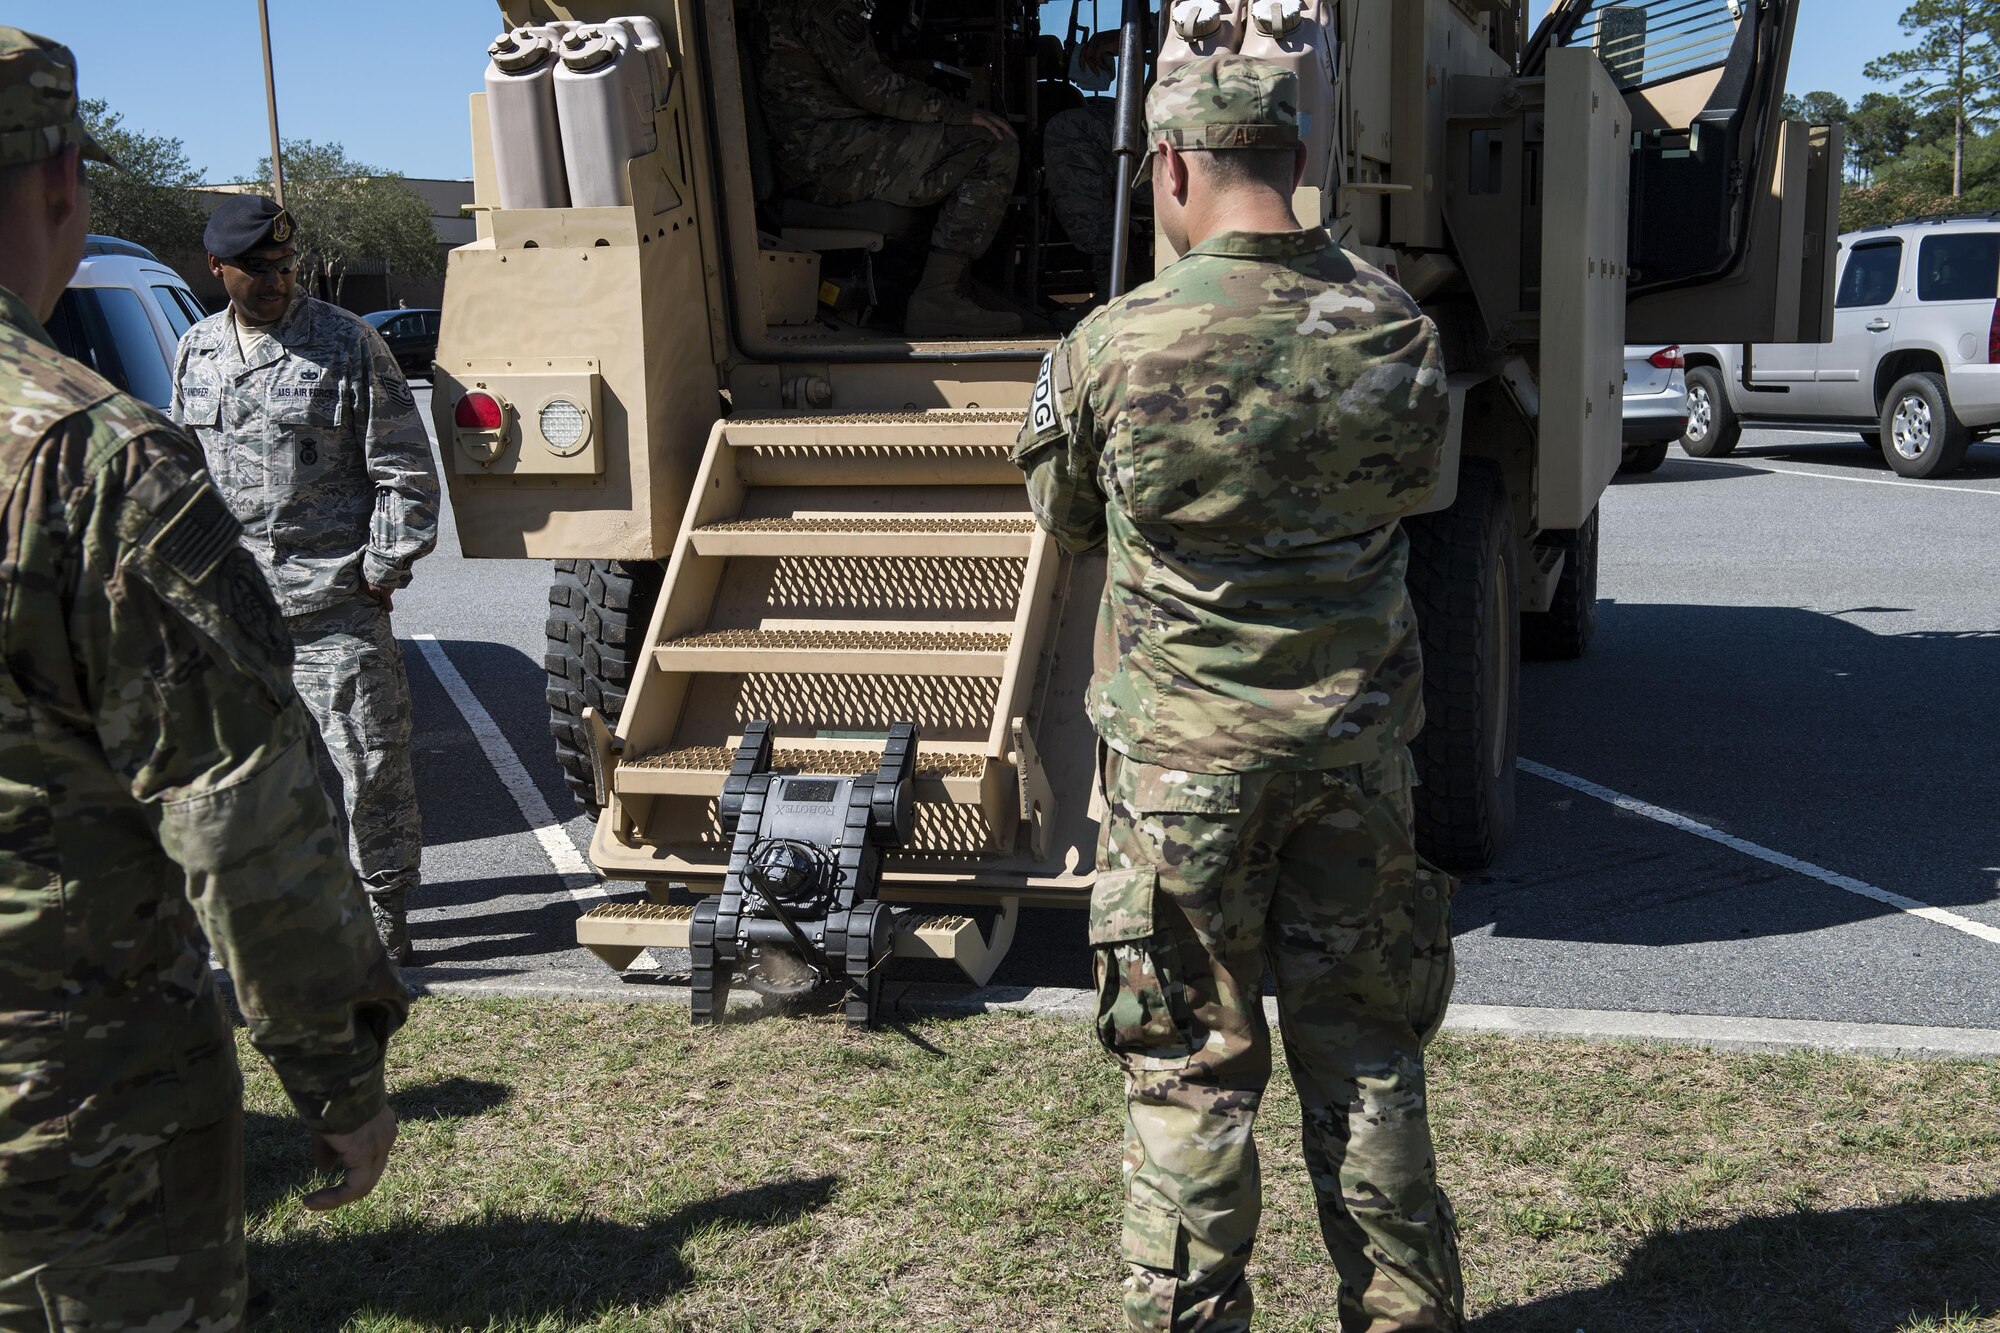 Airmen watch a remote controlled tactical vehicle from the Lowndes County Sherriff’s office attempt to enter a mine-resistant ambush protected vehicle during the Police Week car show, May 16, 2017, at Moody Air Force Base, Ga. Different law enforcement vehicles were put on display for attendees to climb in and ask questions about. (U.S. Air Force photo Senior Airman Janiqua P. Robinson)